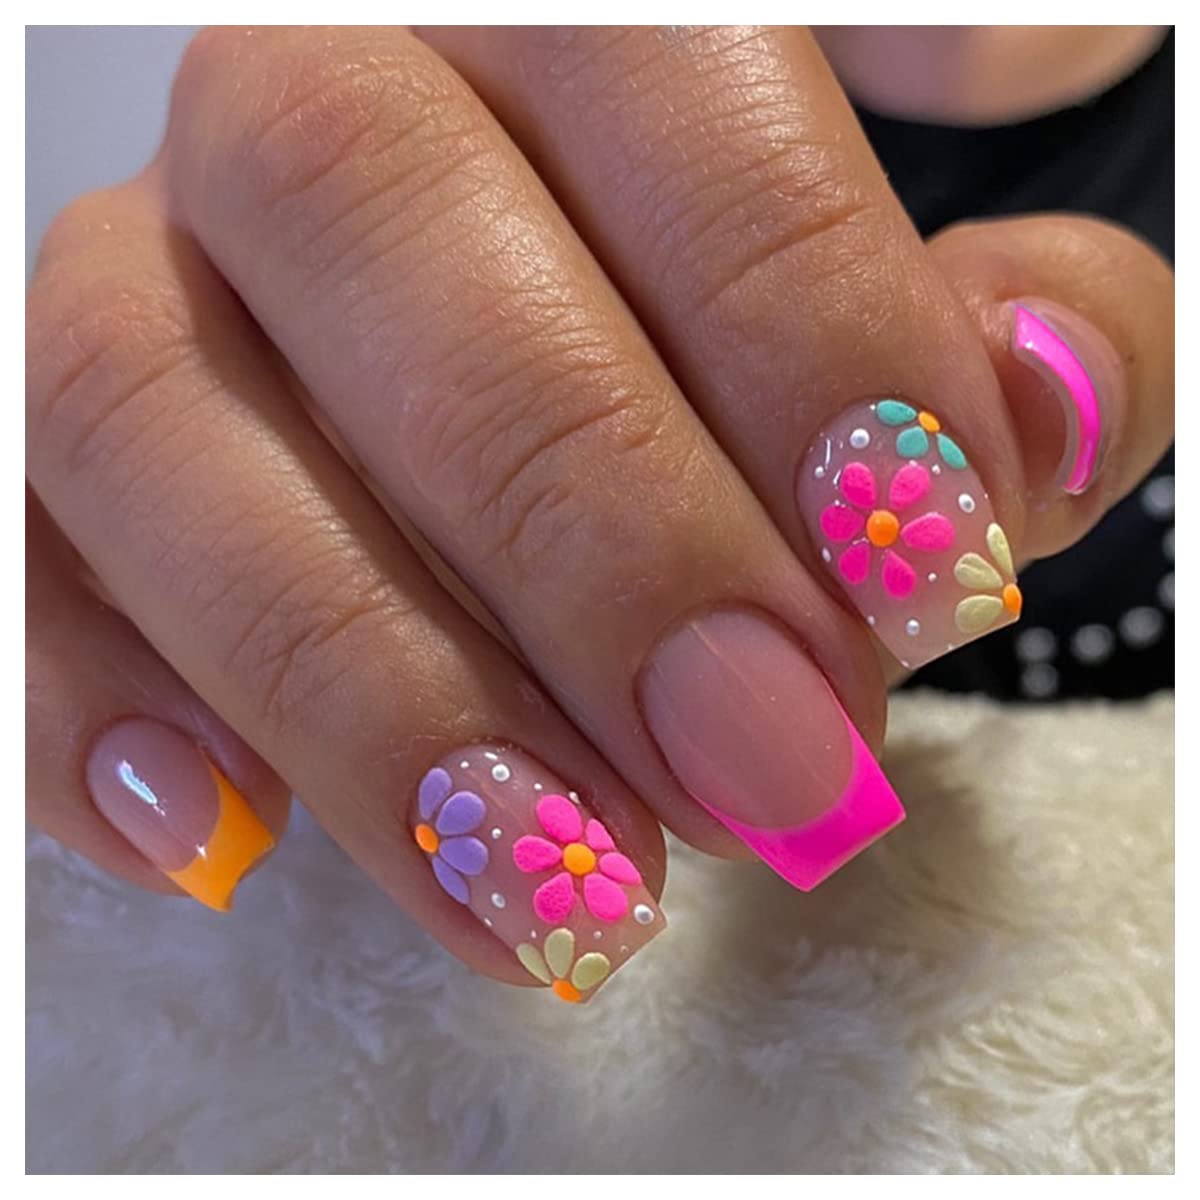 Purple Nails With Flowers Design Press on Nails Fake Nails Glue on Nails 